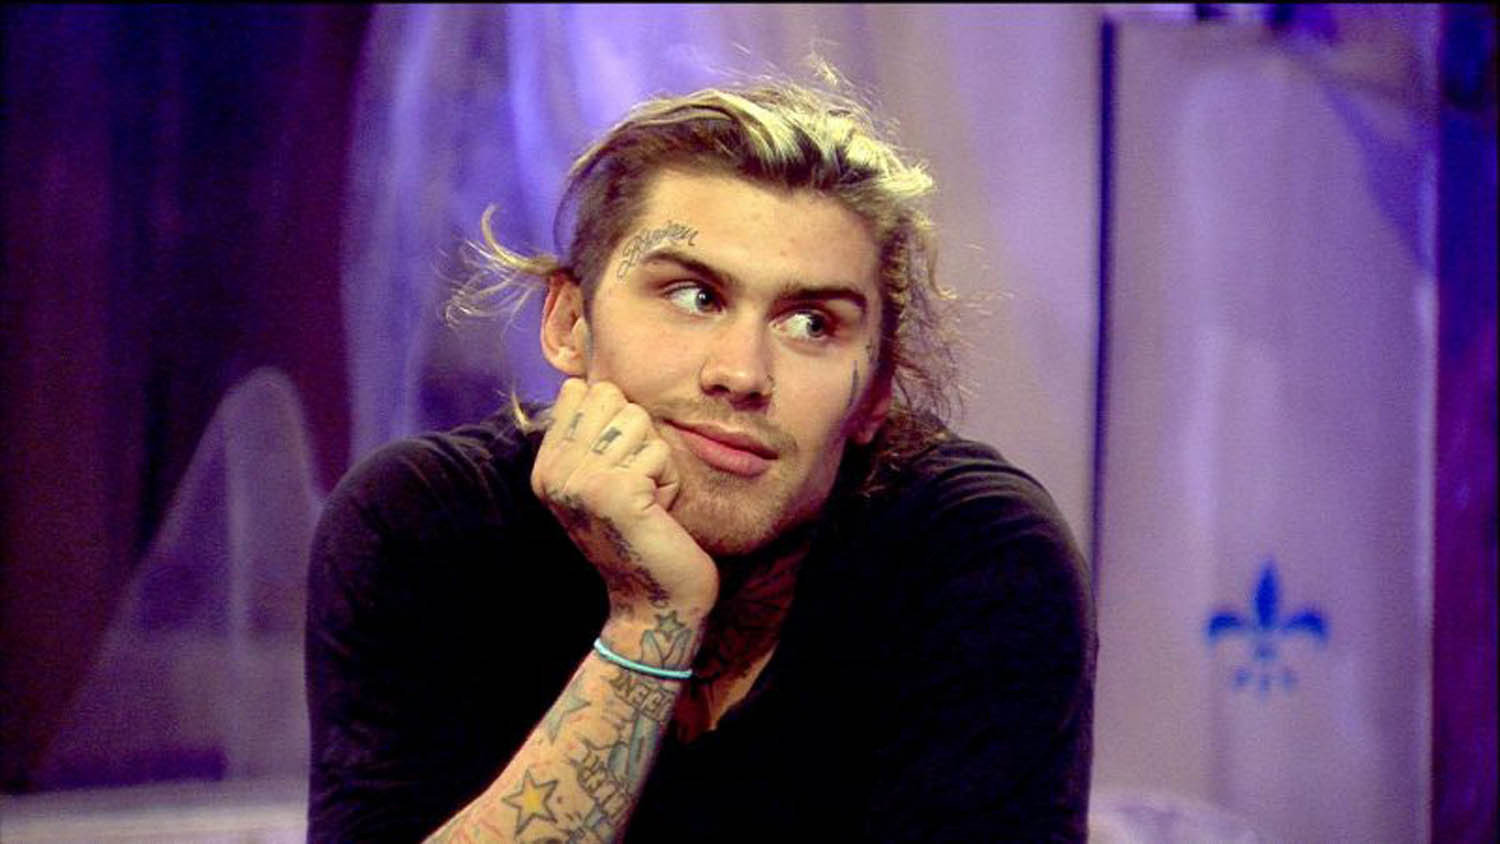 Marco Pierre White Jr gets a new tattoo – on his FACE - heat | Celebrity |  Heatworld